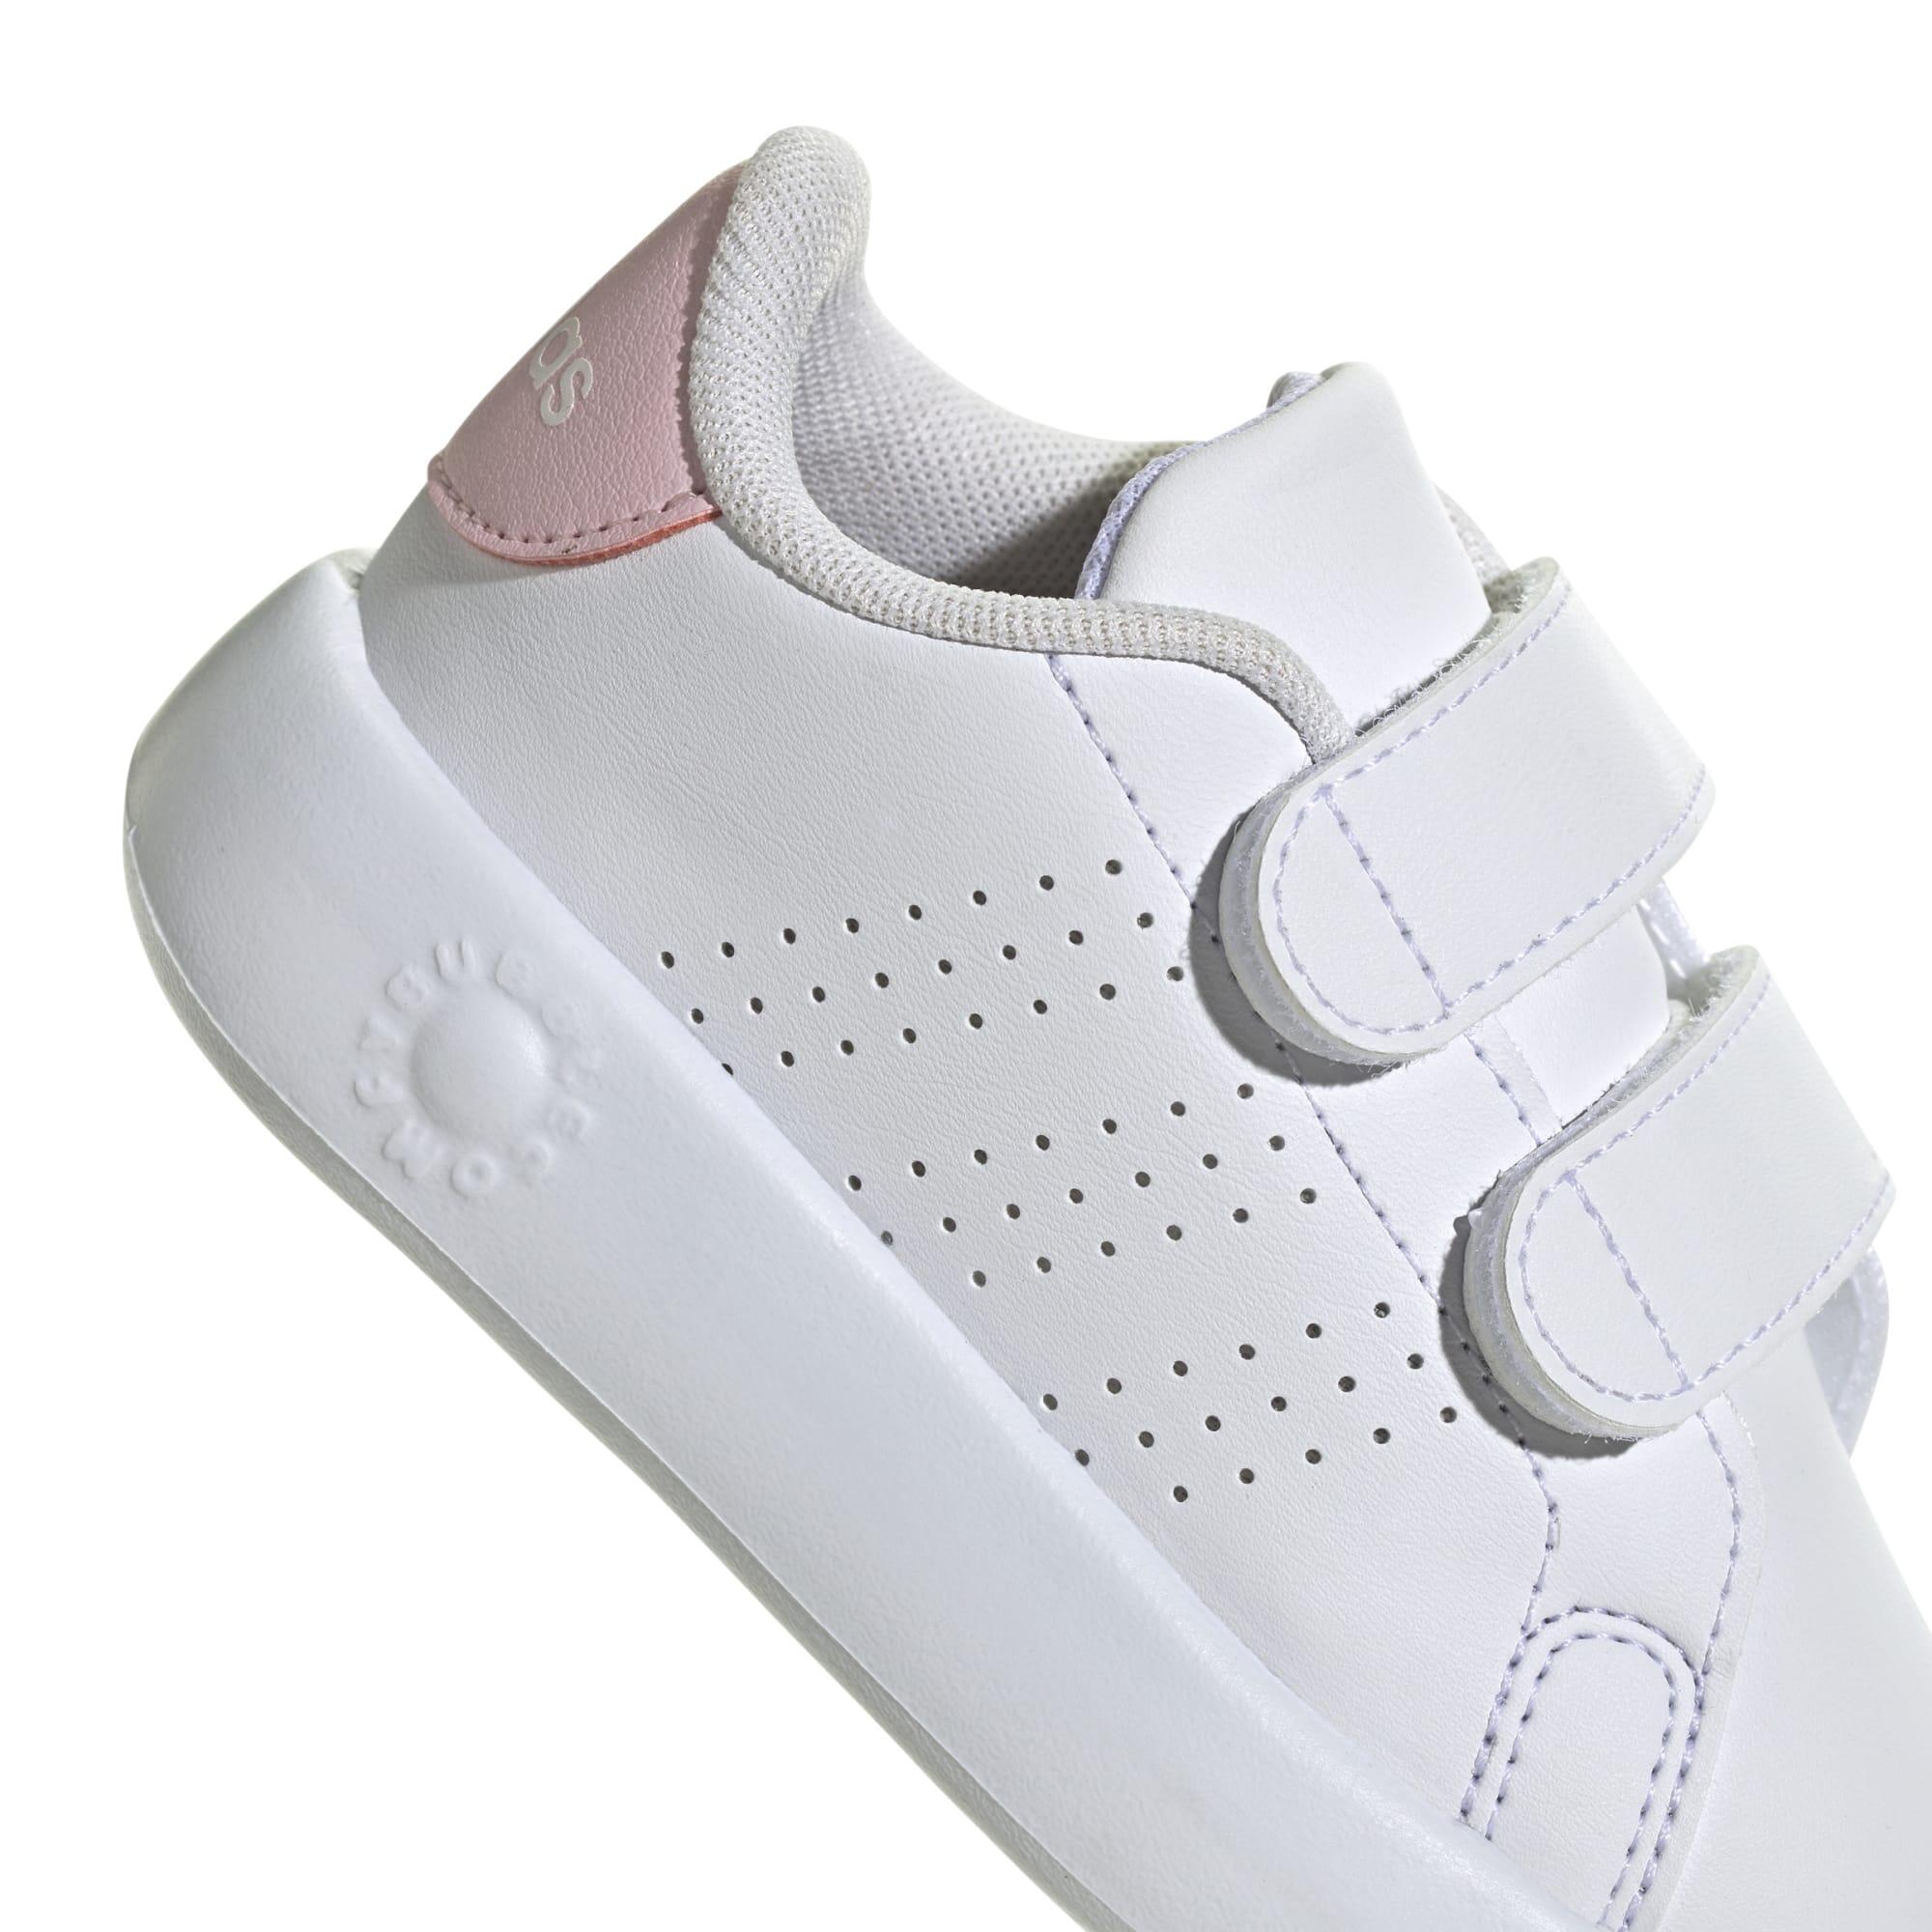 Baby Shoes Advantage (3.5C to 9C) - White/Pink 6/6